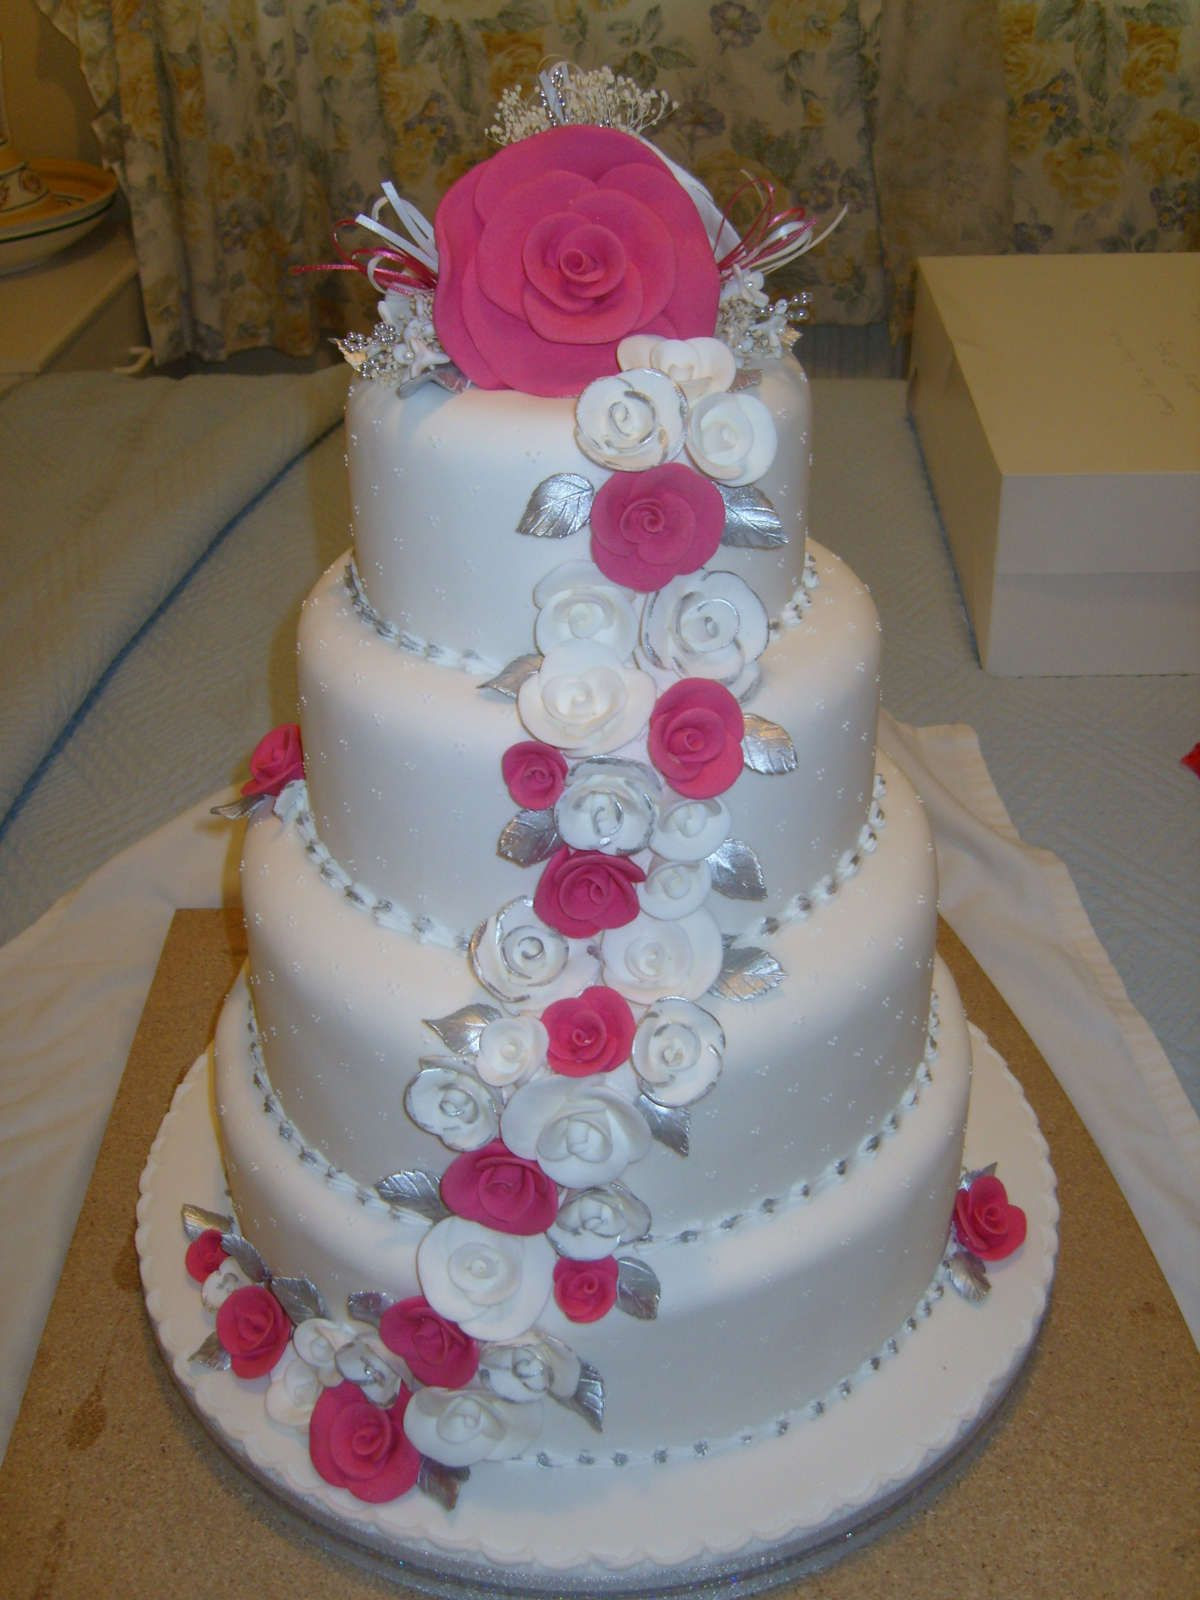 Wedding Cake Recipes From Cake Boss
 30 ULTIMATE WEDDING CAKES TO STEAL THE SHOW